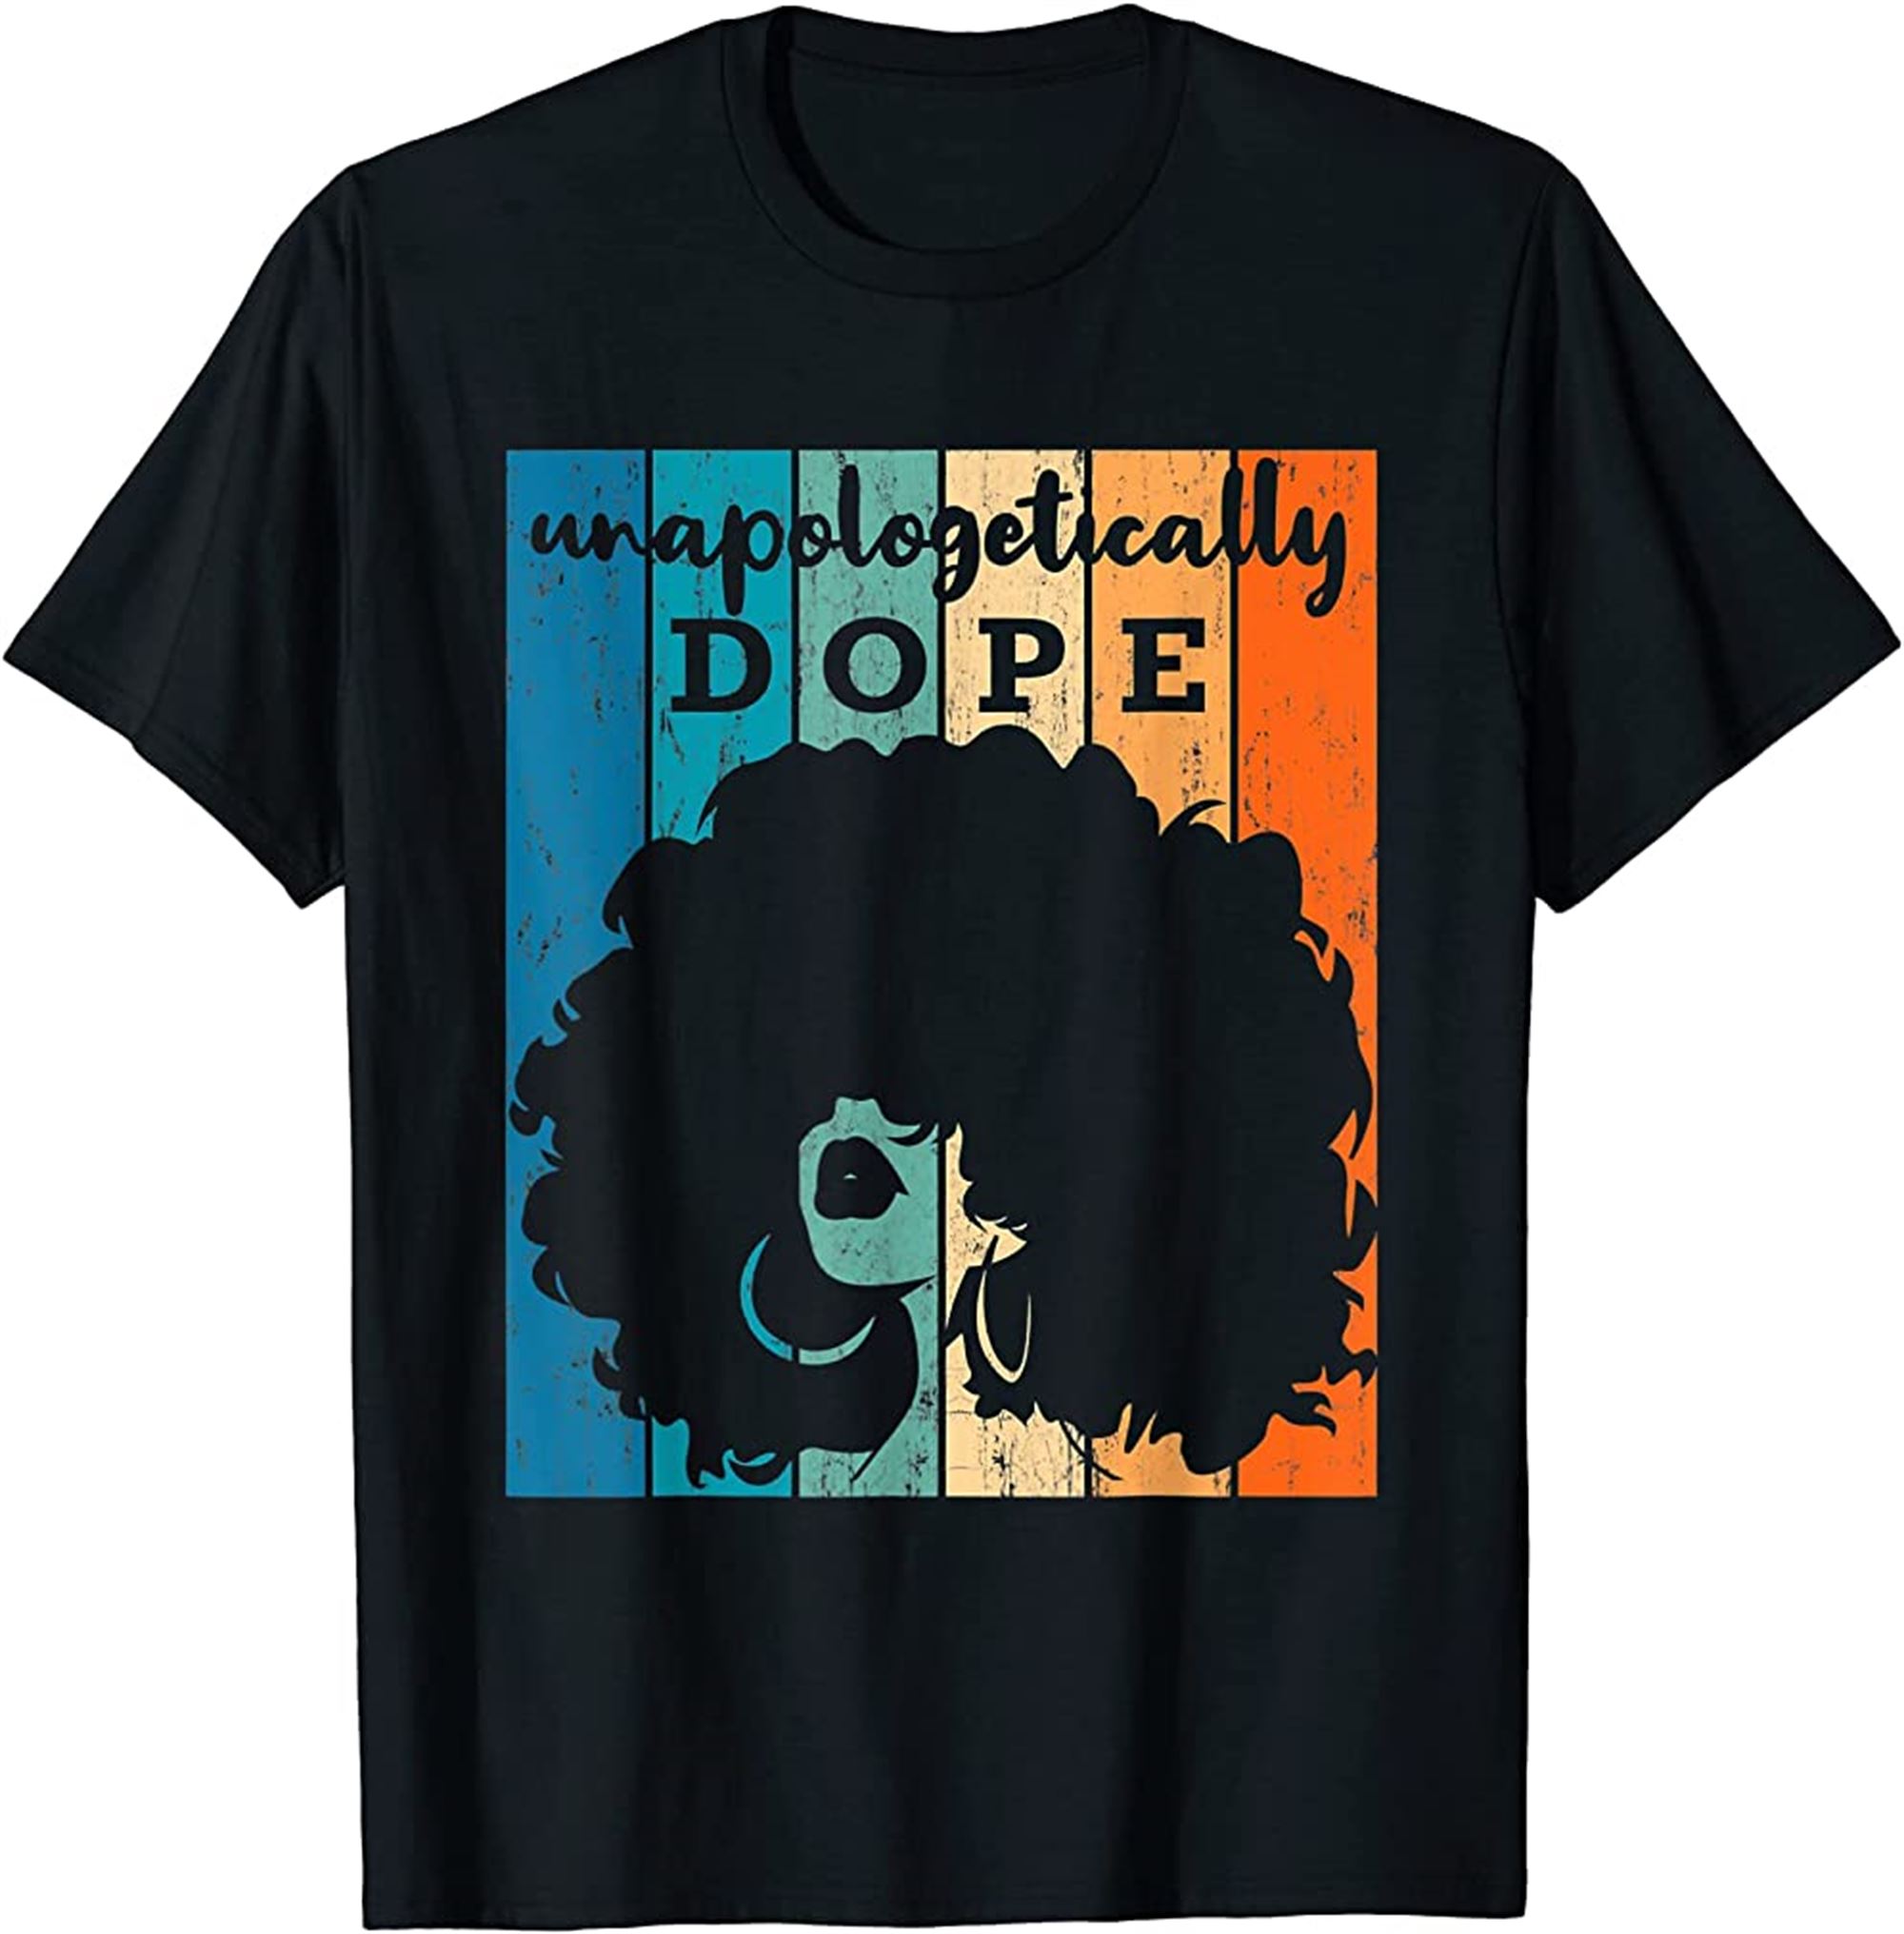 Unapologetically Dope Black Afro Tee Black History Feb Gift T-shirt Size Up To 5xl